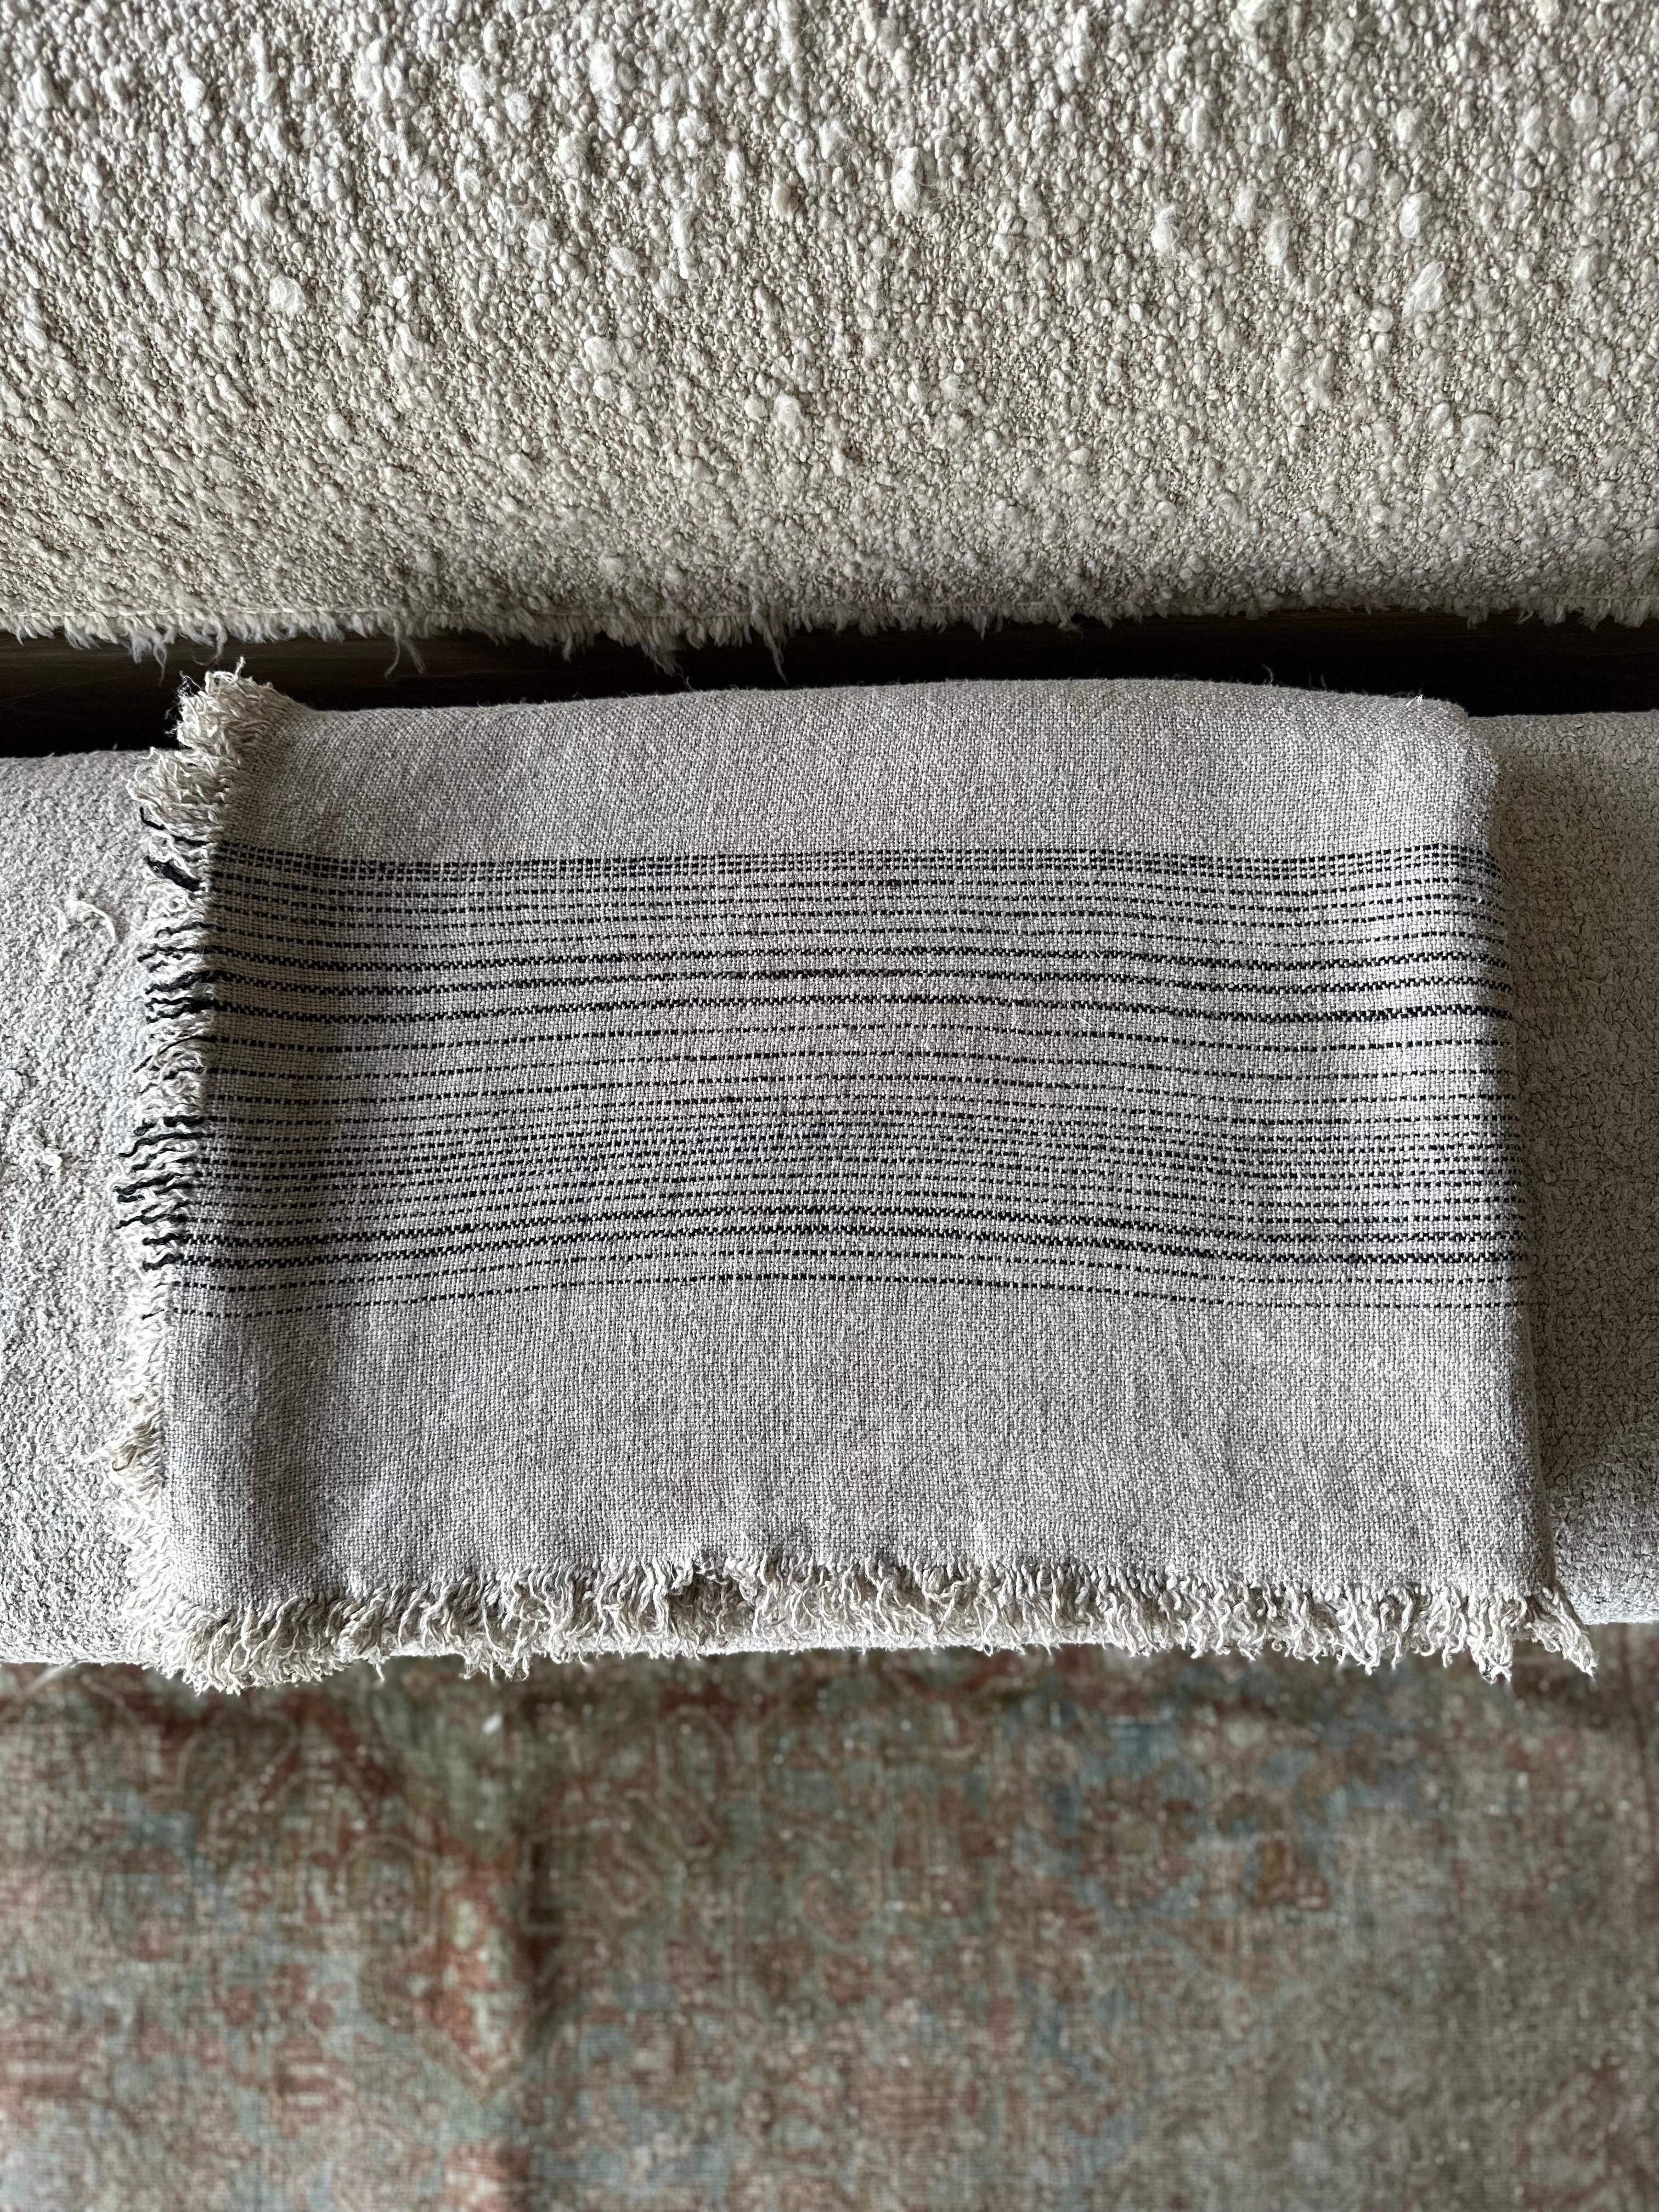 BH COLLECTION
LIN ANCIEN FLAX LINEN THROW
Naturel linen flax thick woven natural and black with fringe edges.
Made in France
70